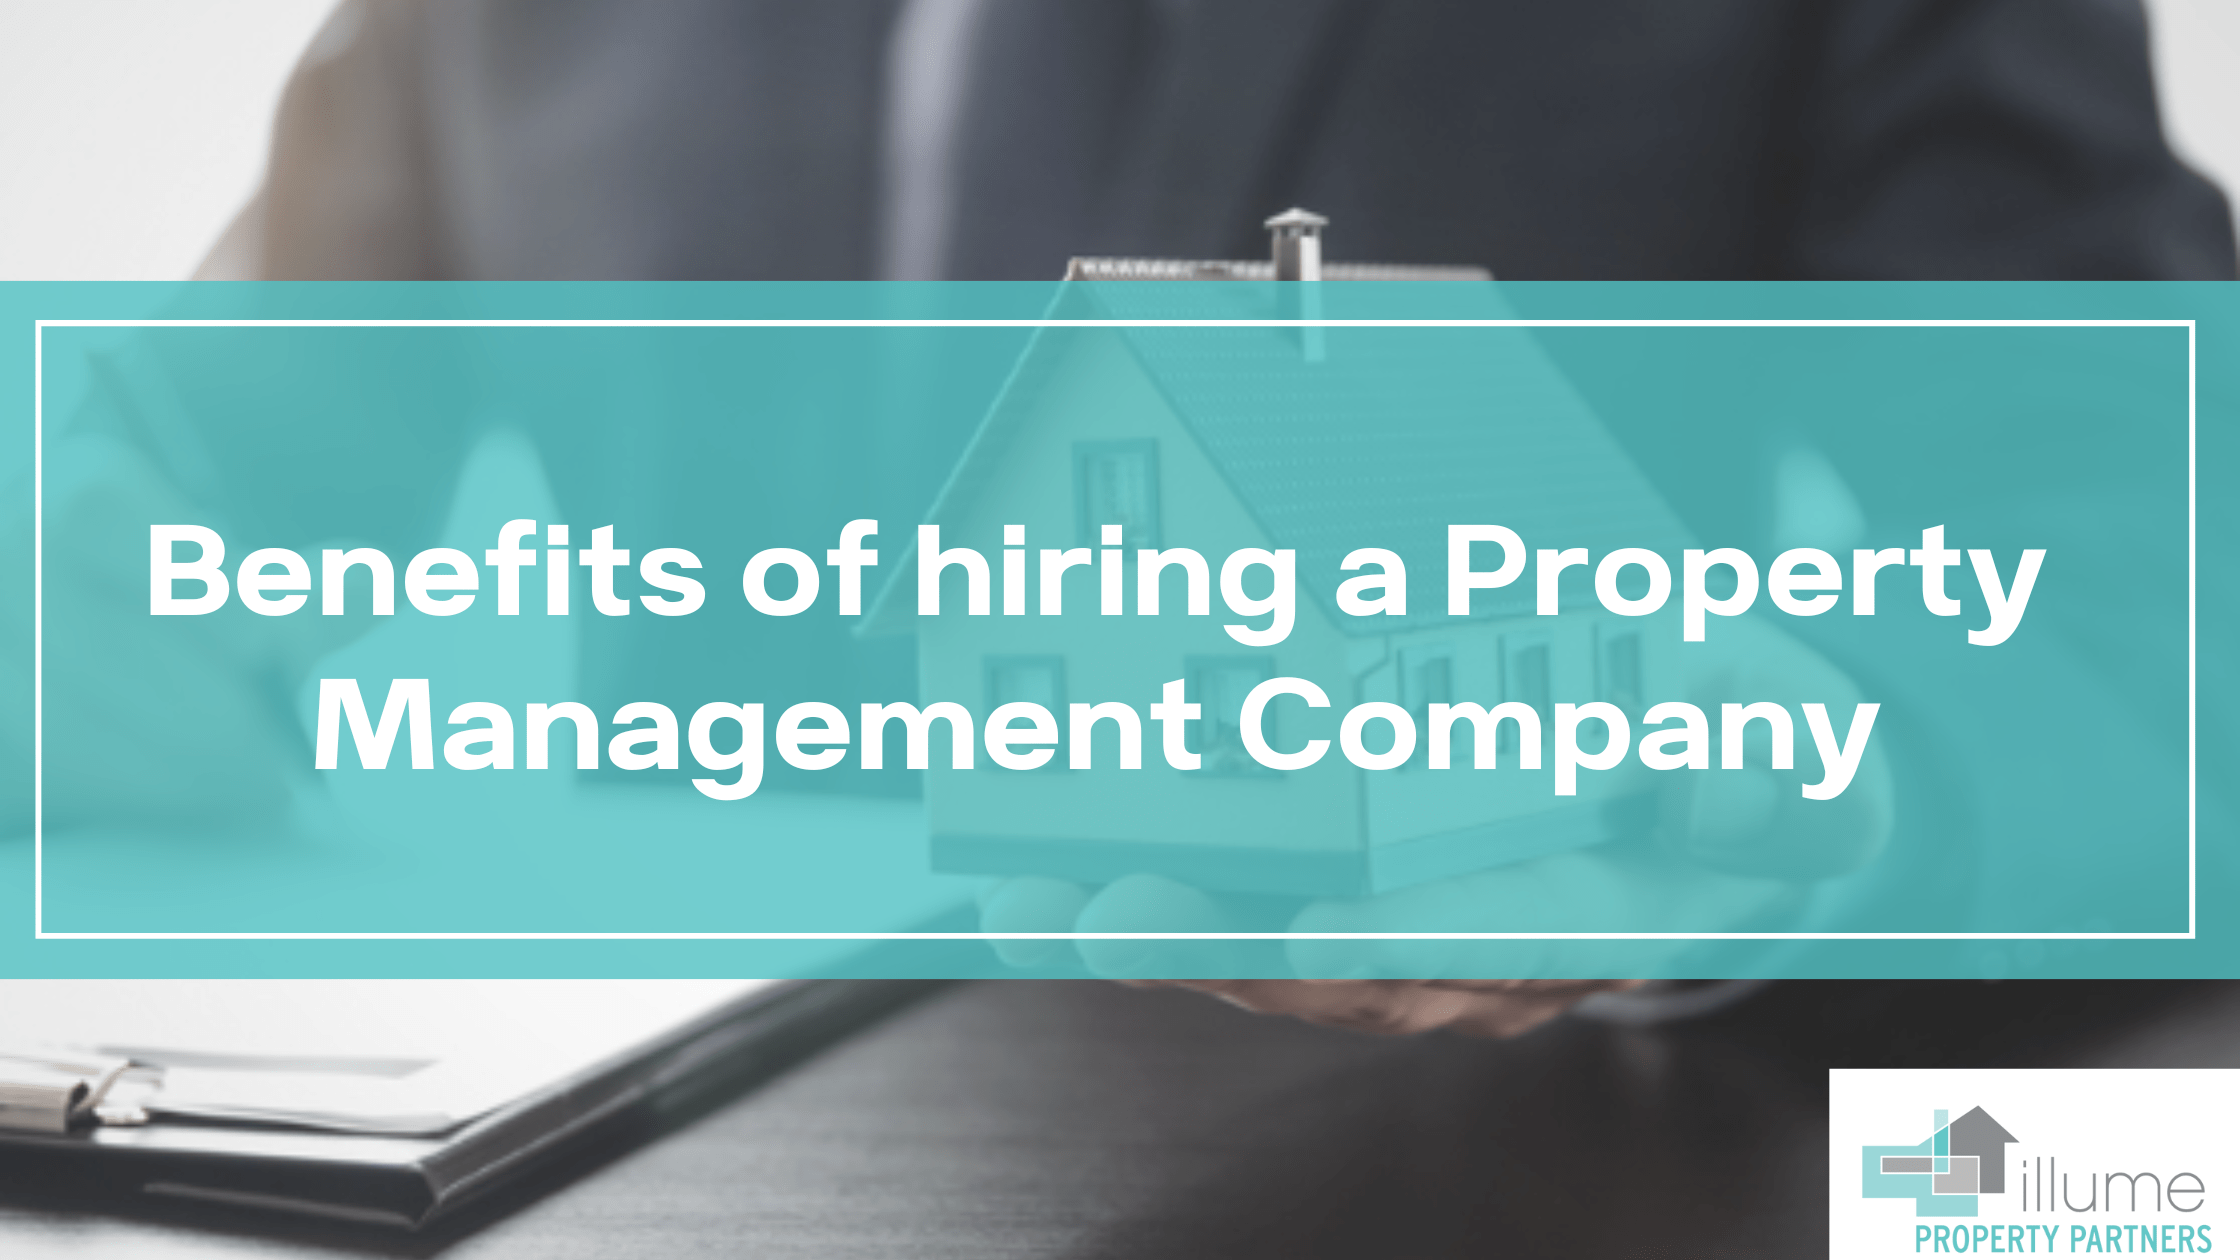 Benefits to Hiring a Property Management Company